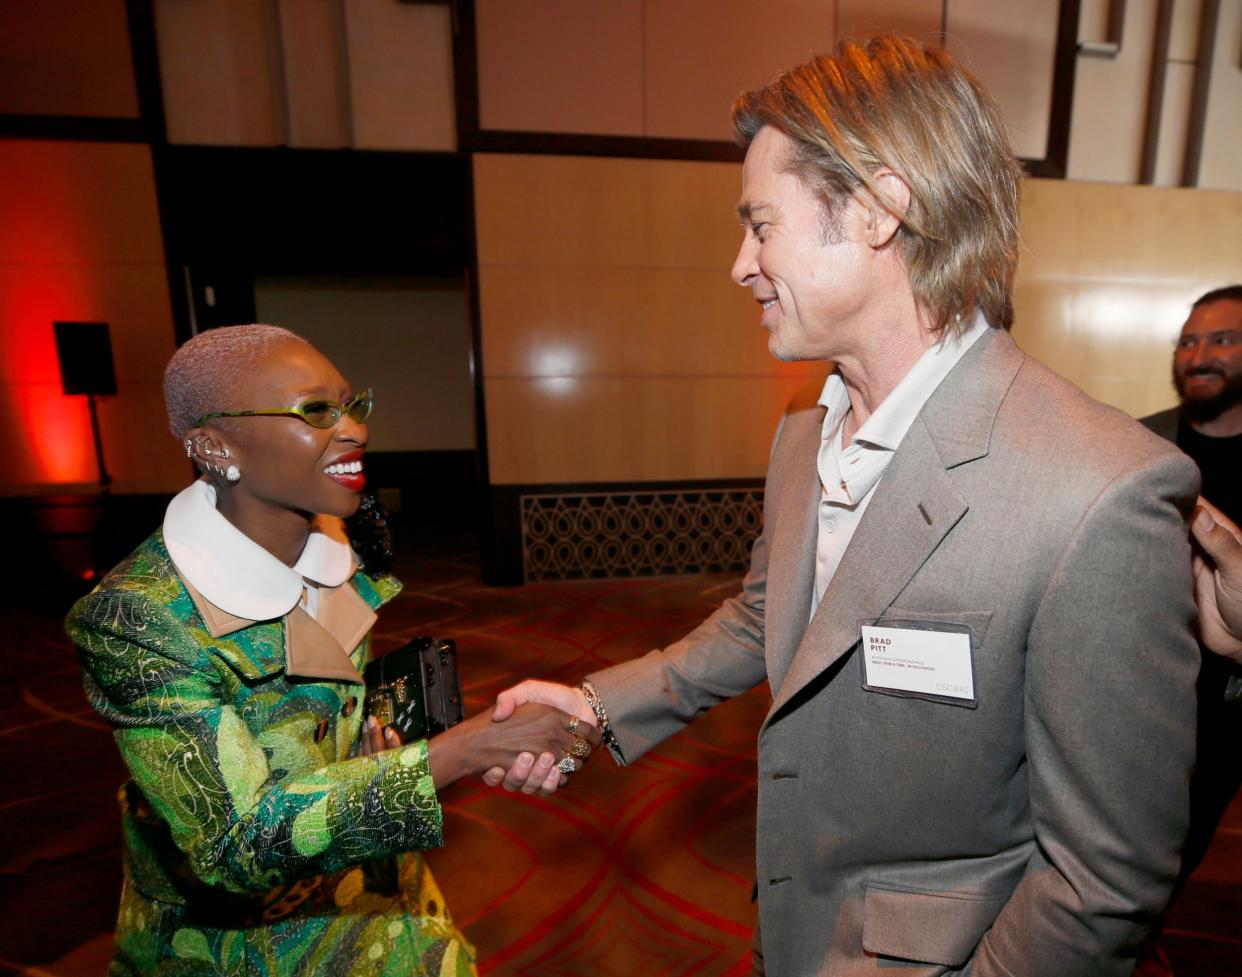 Brad Pitt shaking hands with Cynthia Erivo at the Oscars lunch in LA, Monday 27 January 2020: Danny Moloshok/Invision/AP